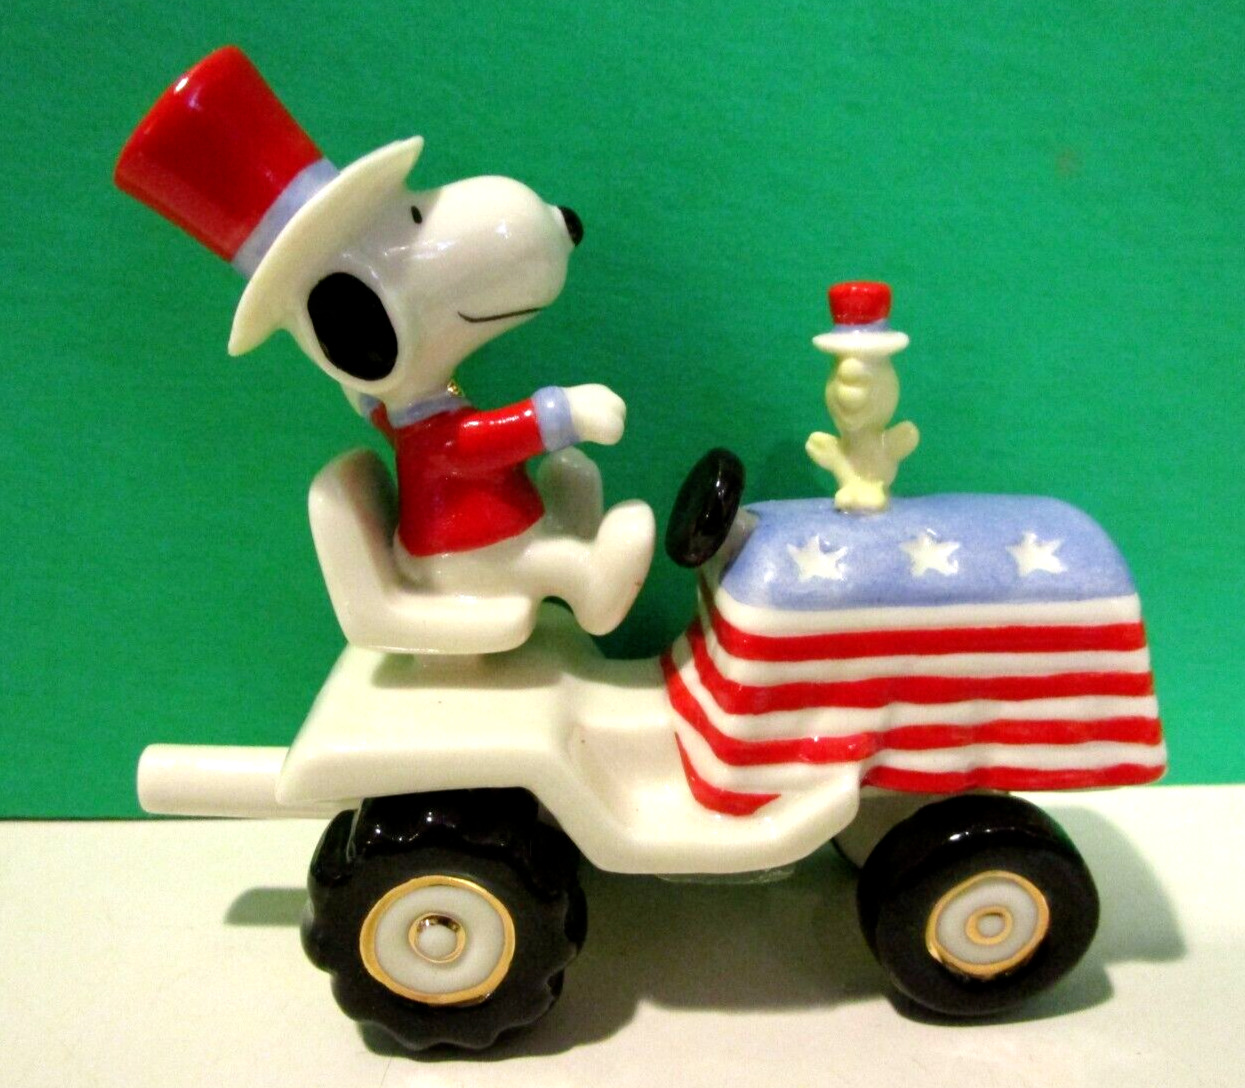 LENOX Peanuts SNOOPY TRACTOR WOODSTOCK It's Independence Day - NEW MINT - NO BOX